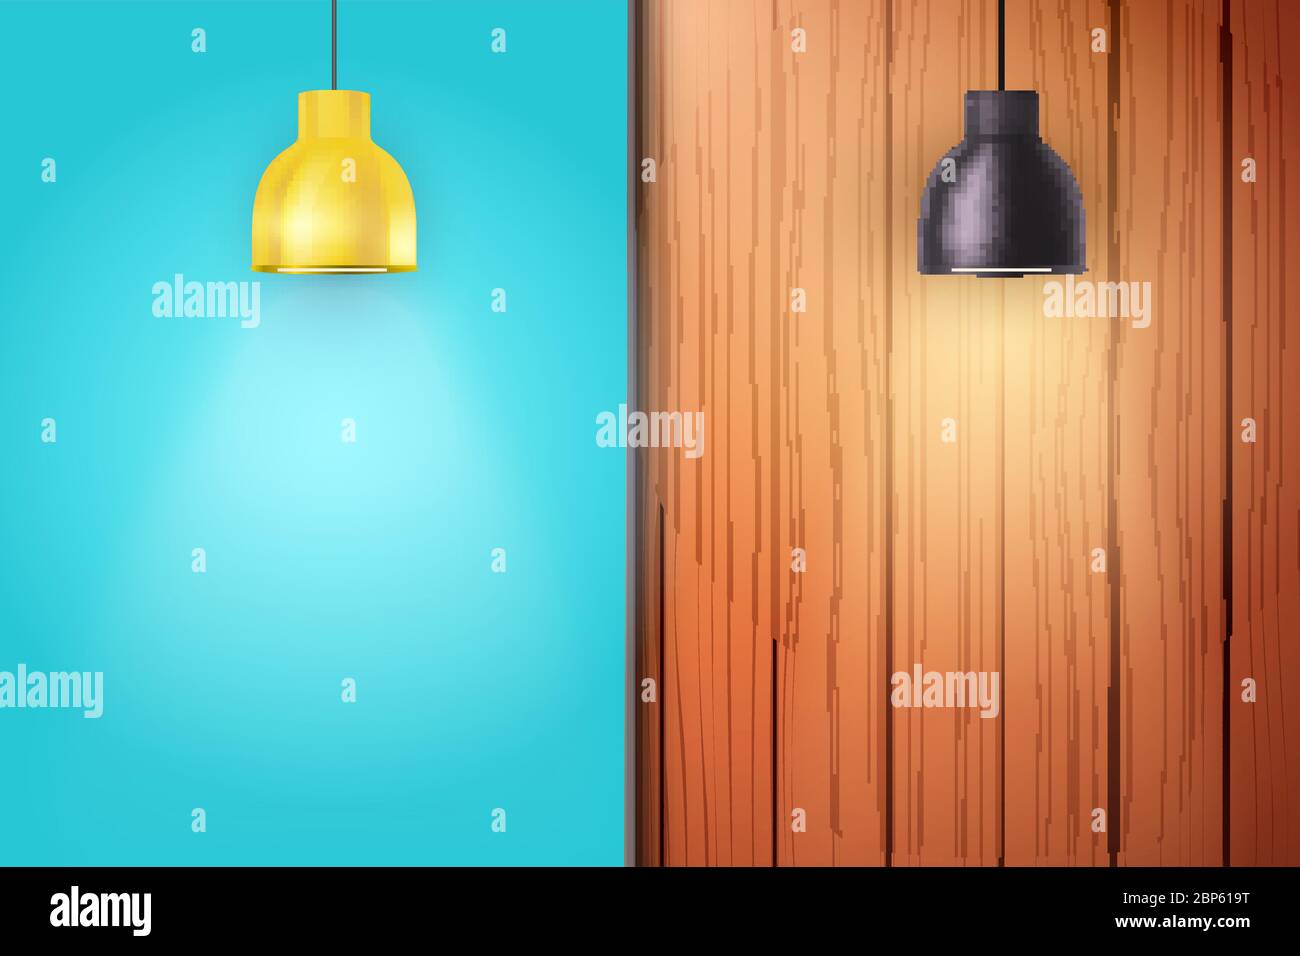 Wooden wall with vintage lamps Stock Vector